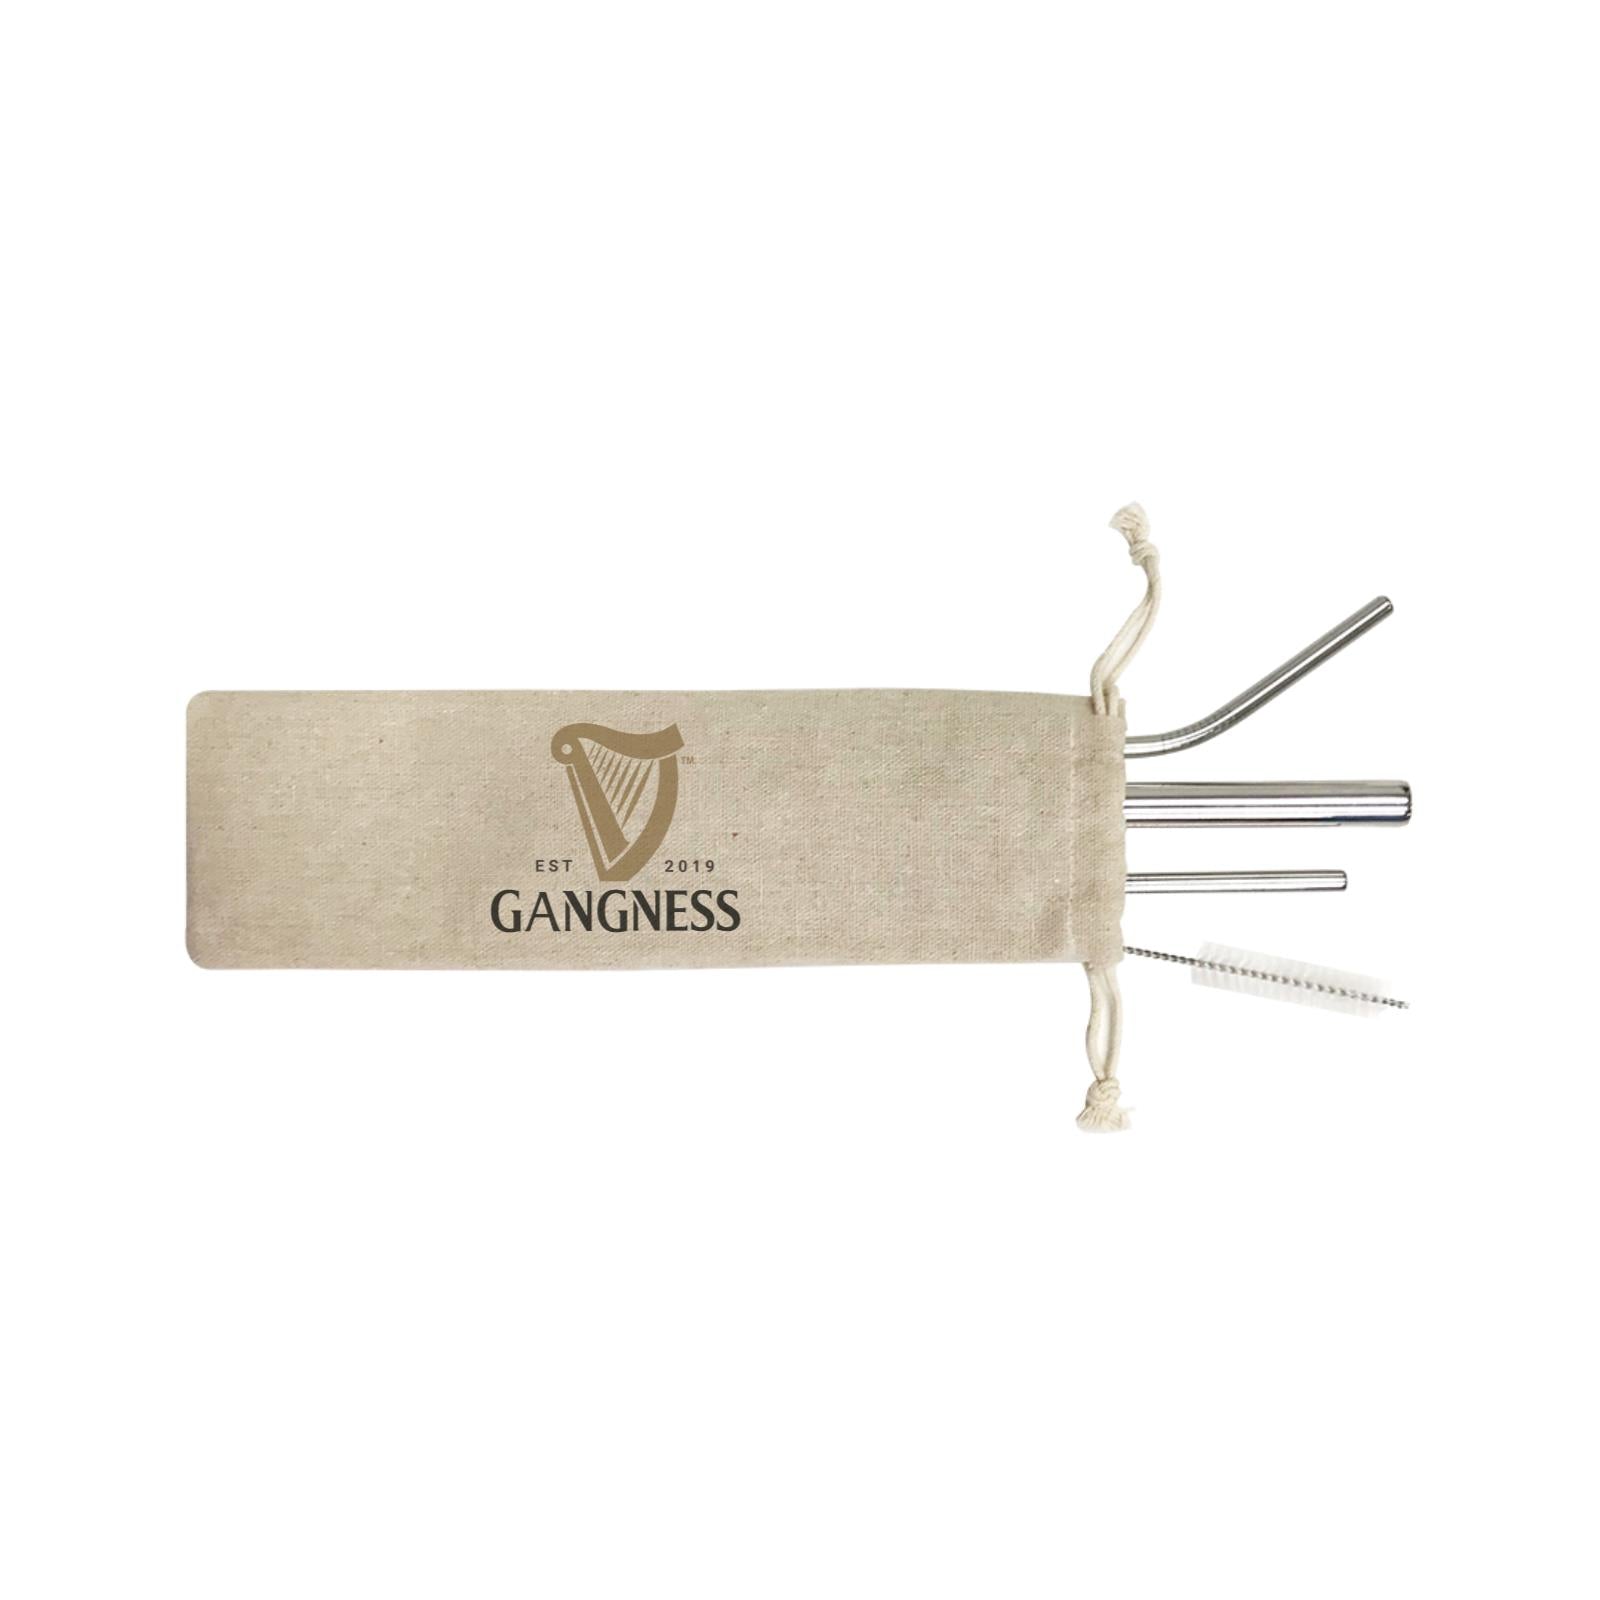 Slang Statement Gangness 4-in-1 Stainless Steel Straw Set In a Satchel